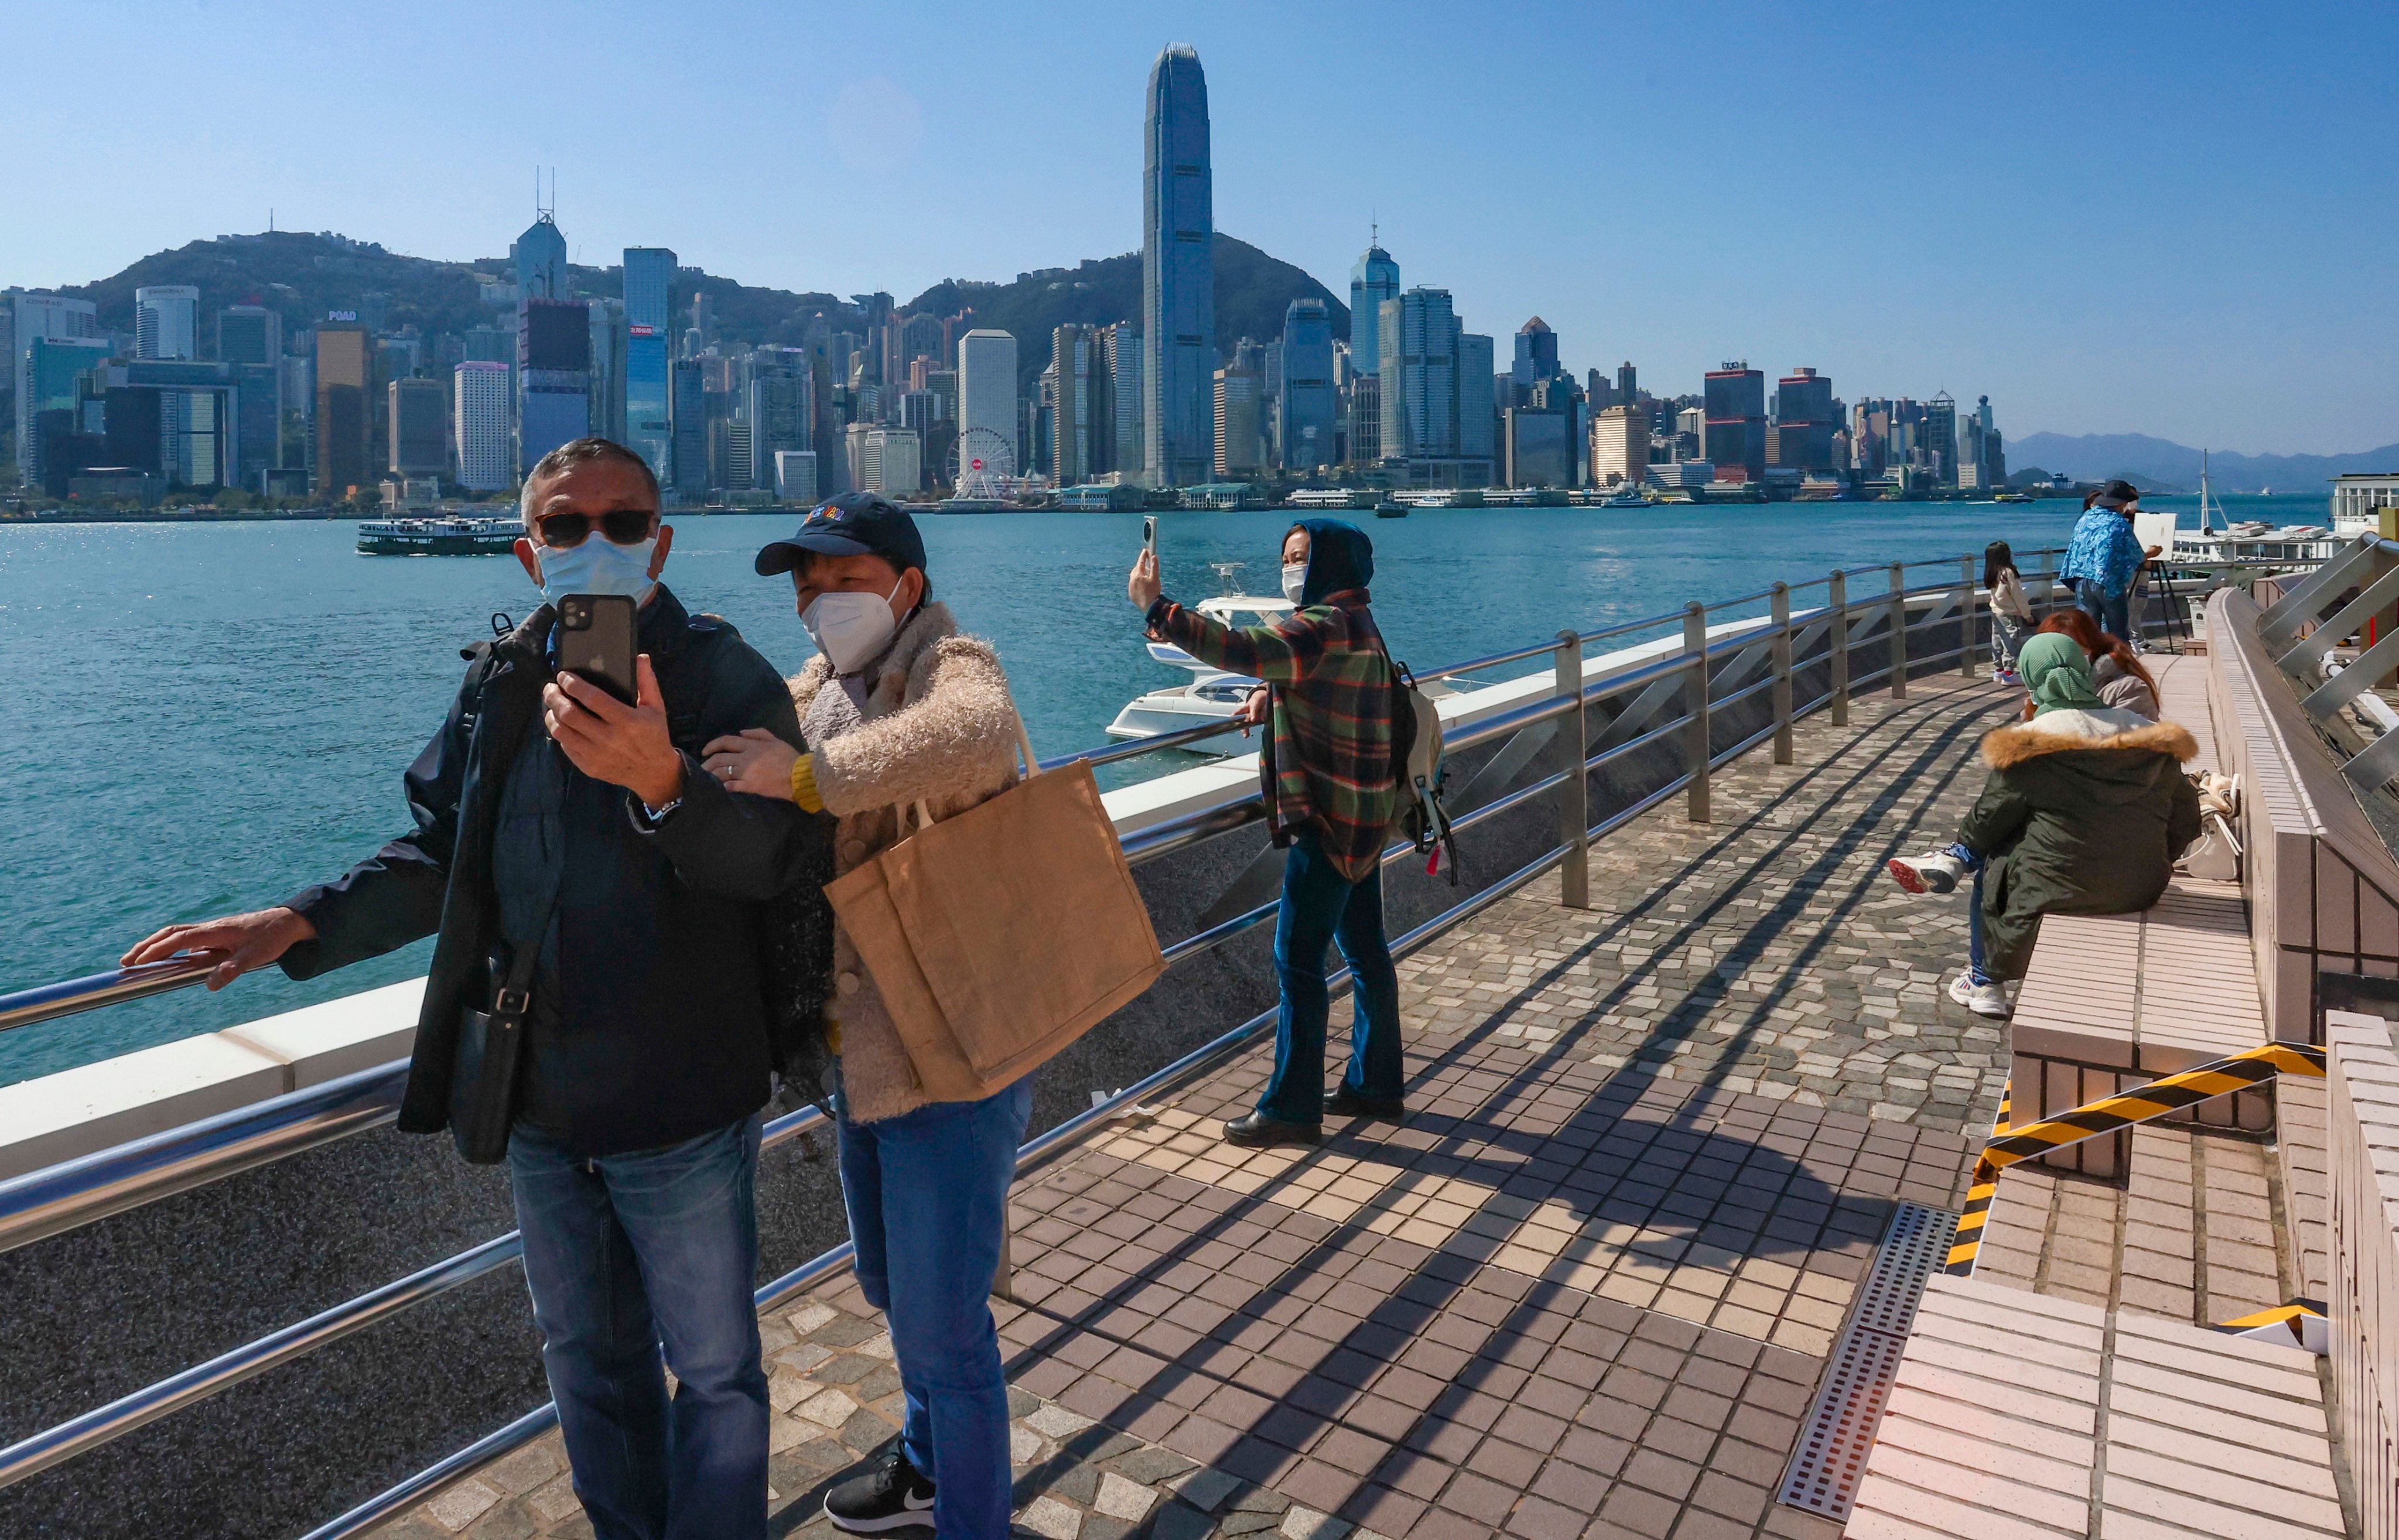 Hong Kong recorded its best air quality in a decade last year amid reduced economic activities brought about by the Covid-19 pandemic. Photo: Jonathan Wong